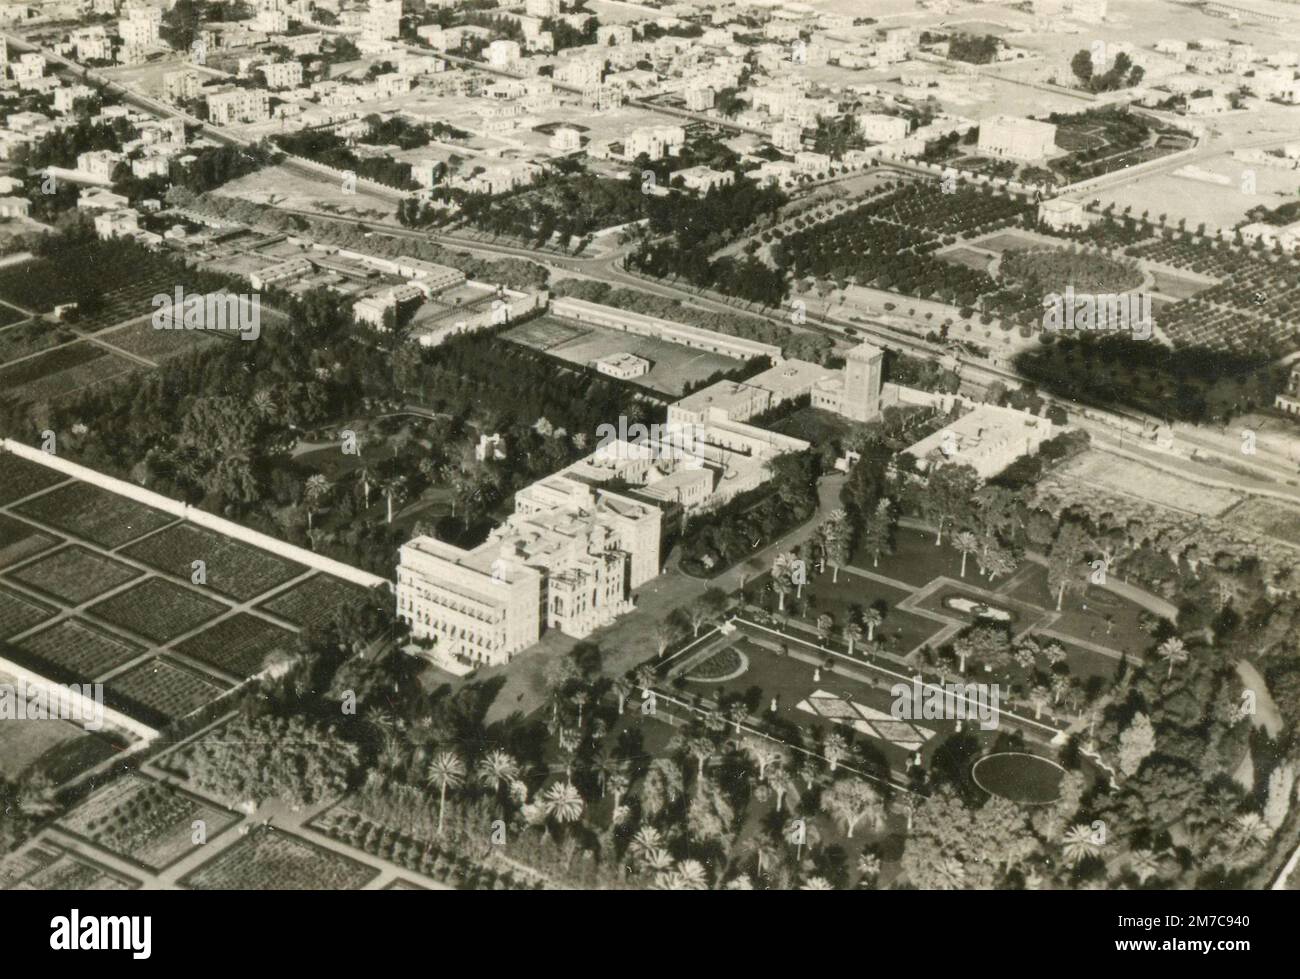 Aerial view of King Fuad's Palace in Cairo, Egypt 1900s Stock Photo